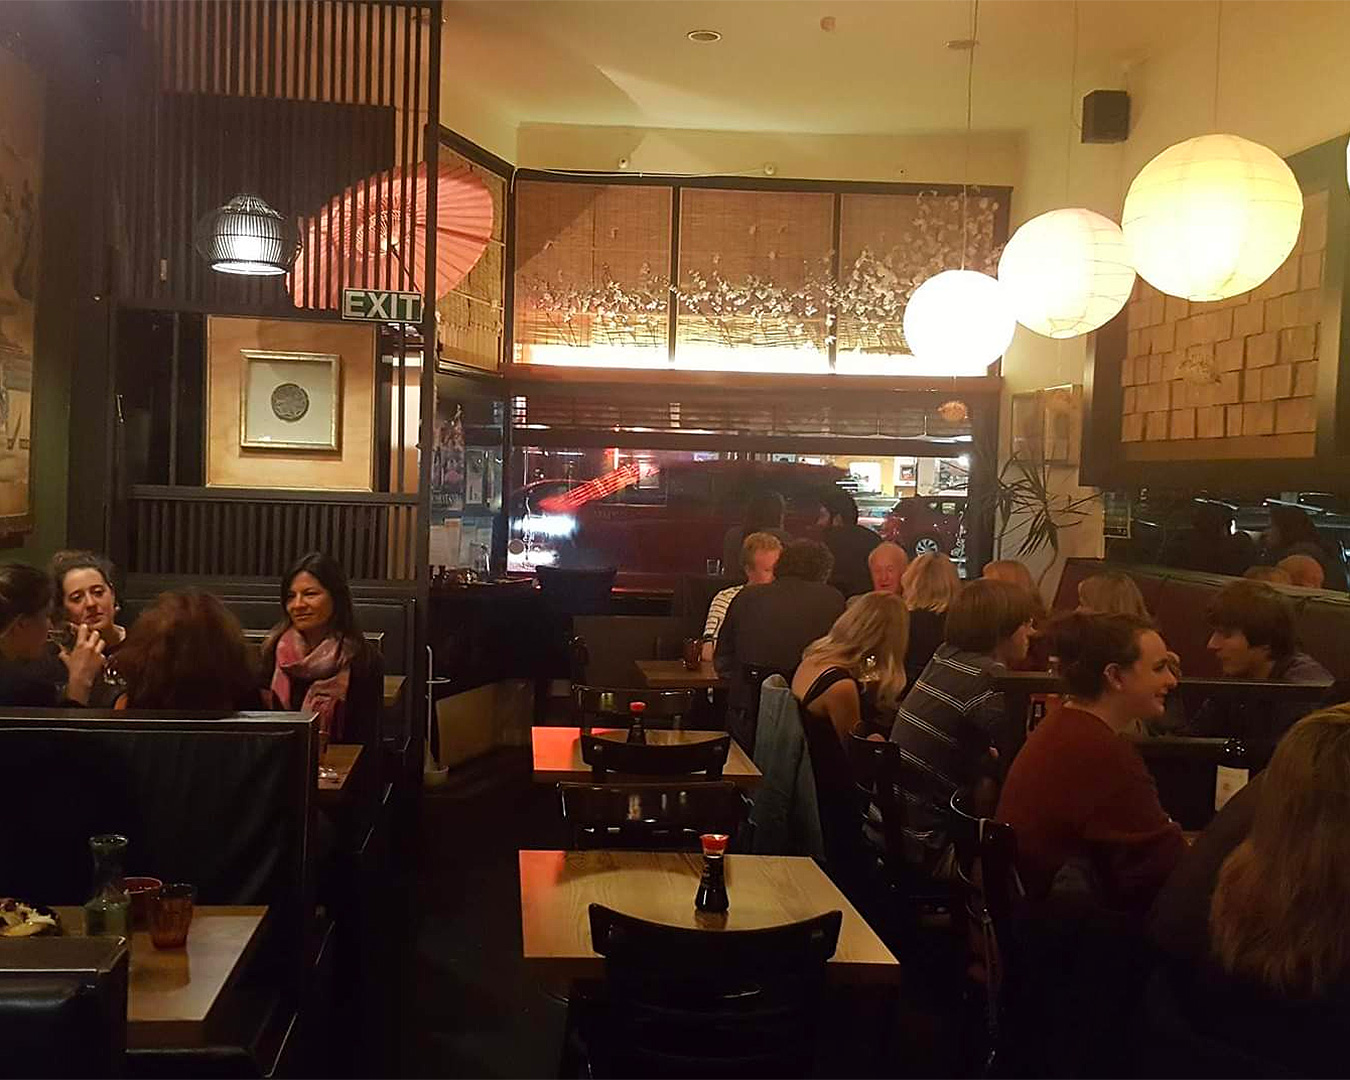 People dine in the busy dining room at Yuzu, one of the best Japanese restaurants in Auckland.